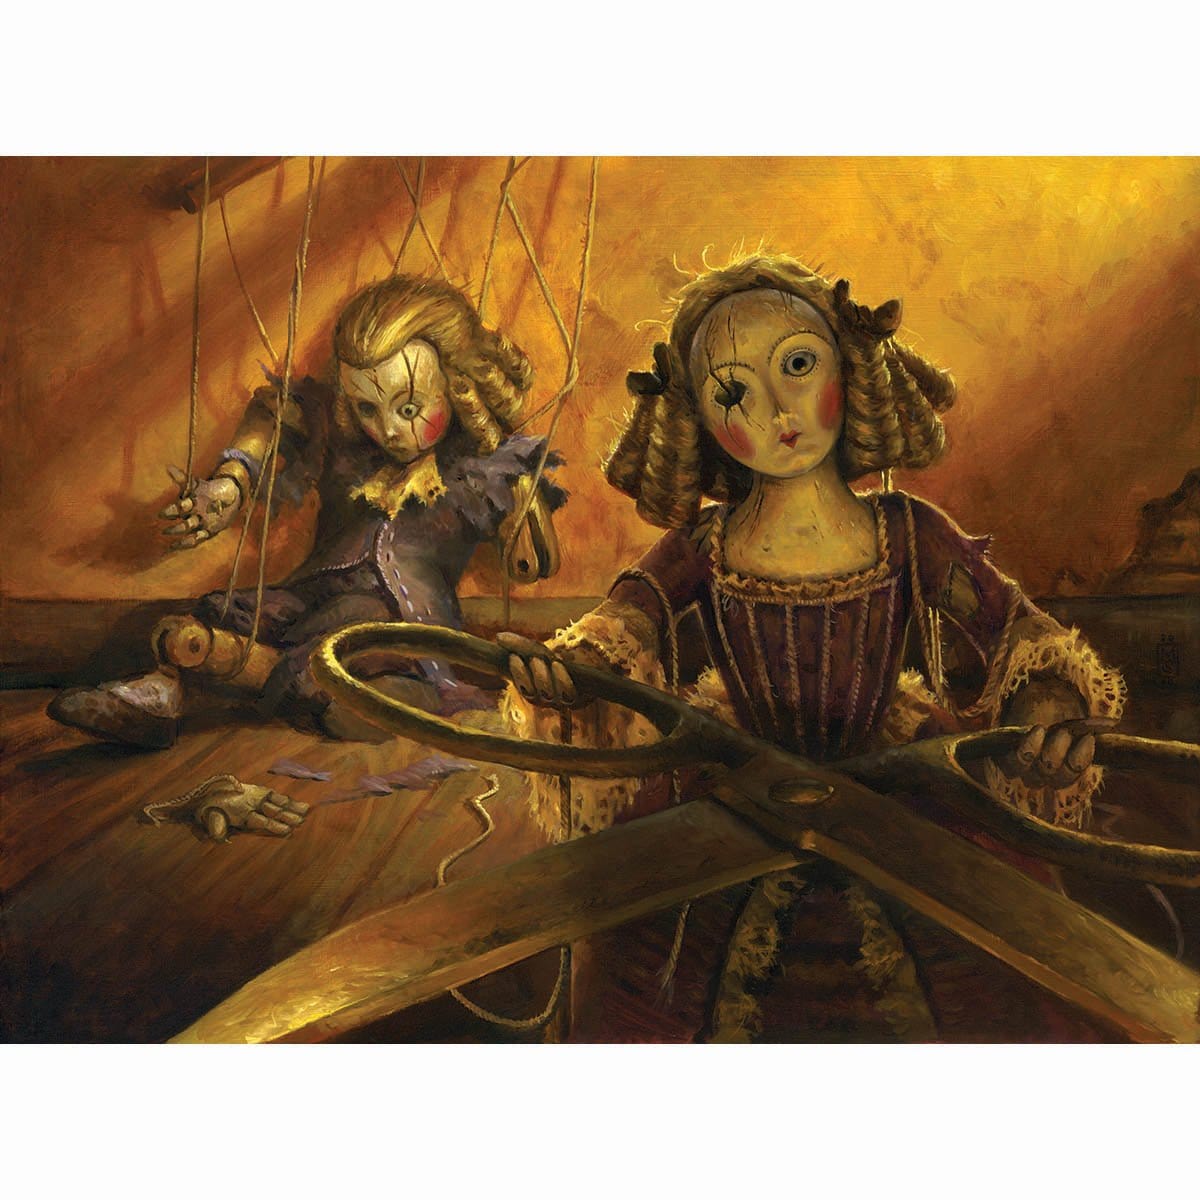 Creepy Doll Print - Print - Original Magic Art - Accessories for Magic the Gathering and other card games